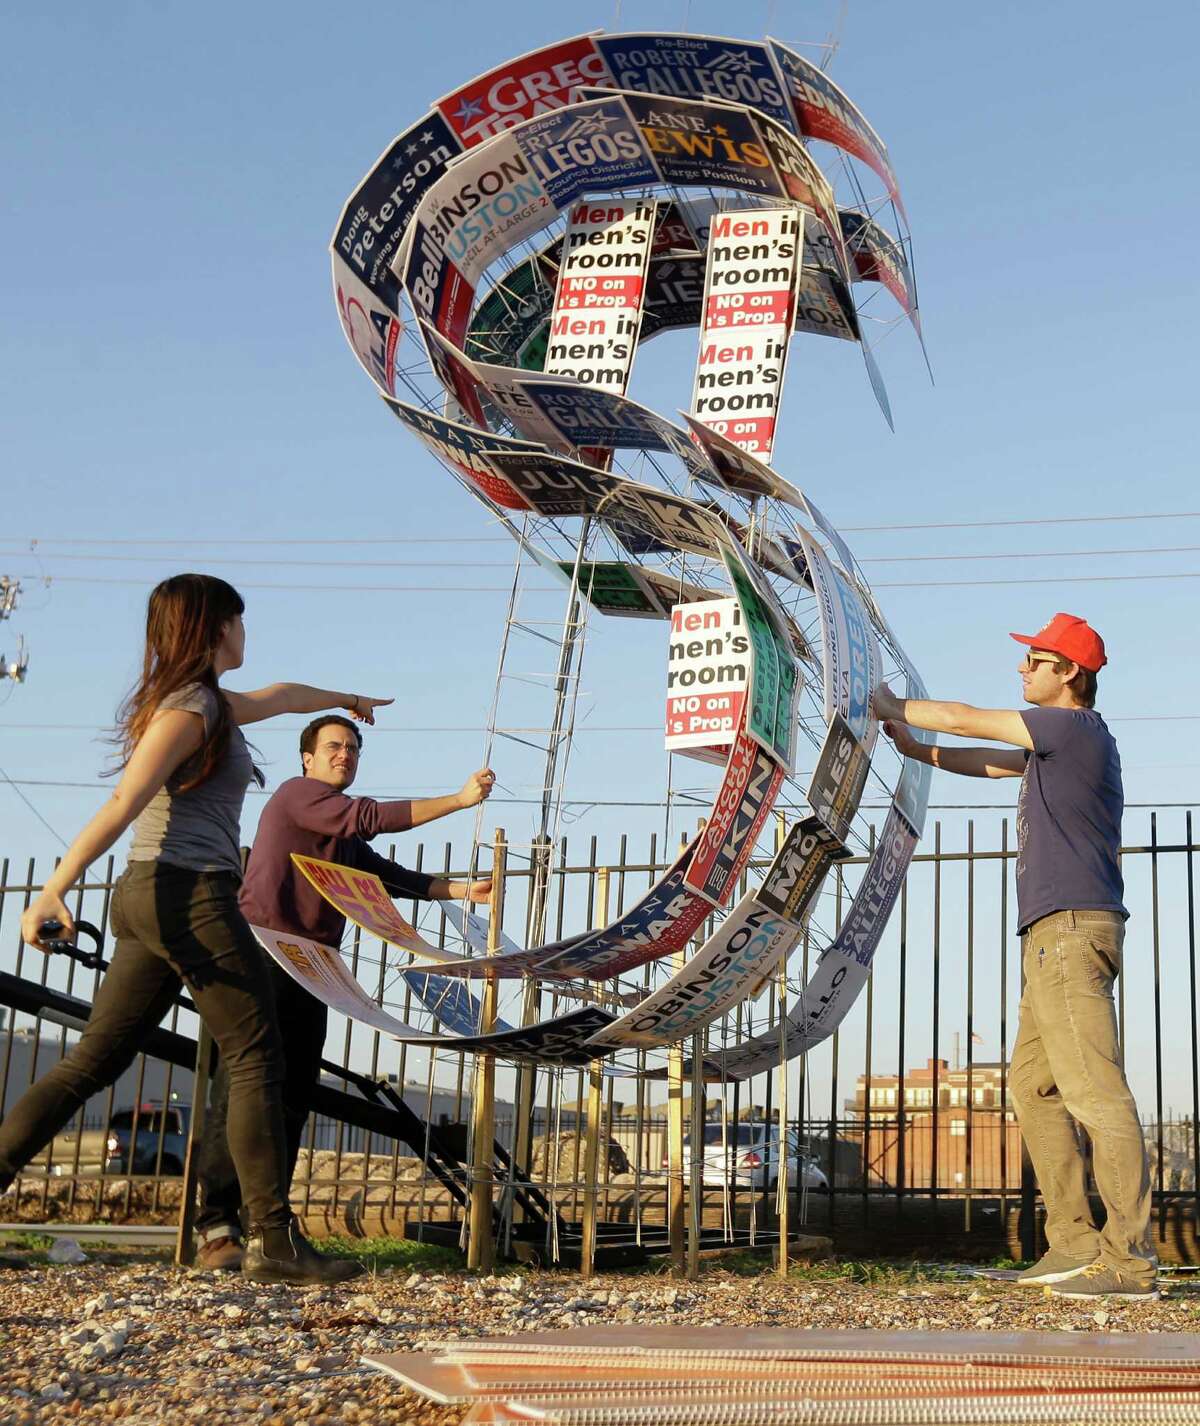 Stephanie Wherry, left, Joshua Fischer, center, and Ted Rubenstein, right, work on building an art installation made from old campaign signs Sunday, Dec. 6, 2015, in Houston. They expect to have the piece on display for Saturday's election.